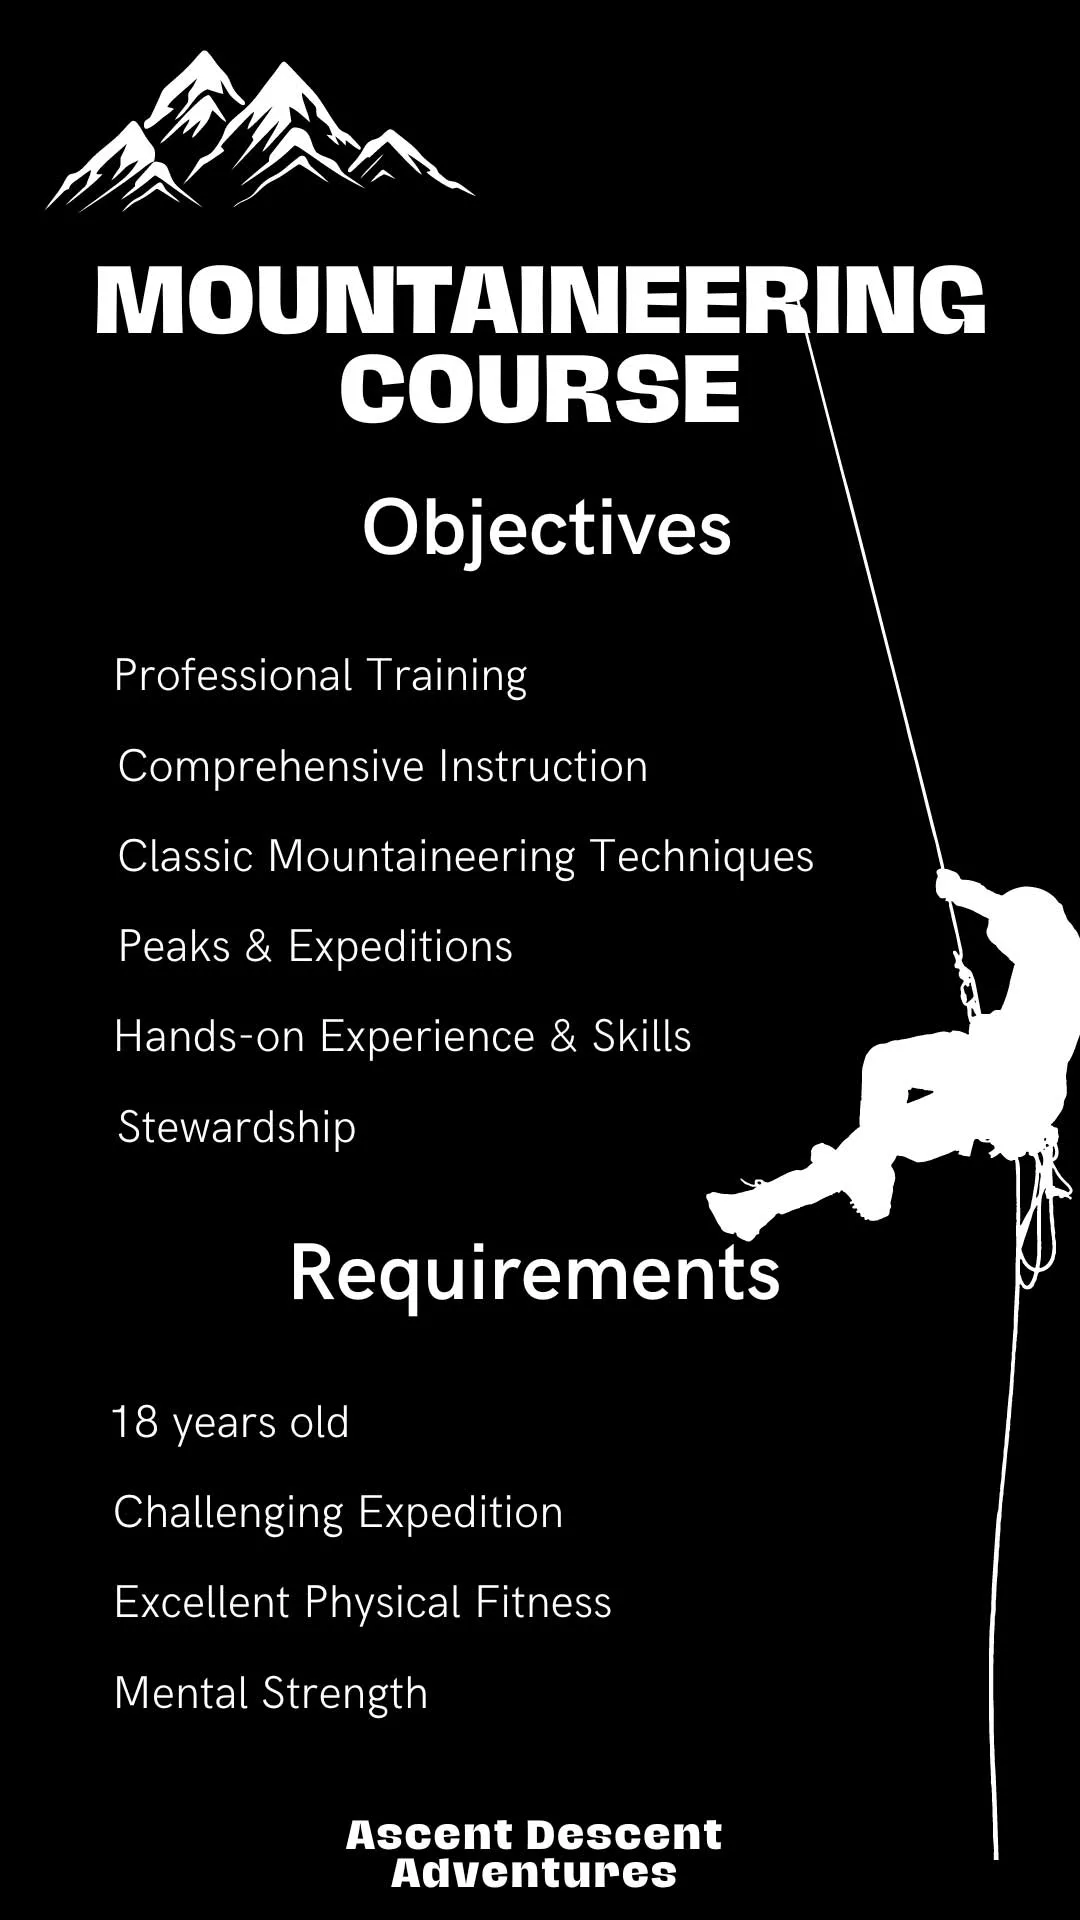 Mountaineering Course Objectives and Requirements 